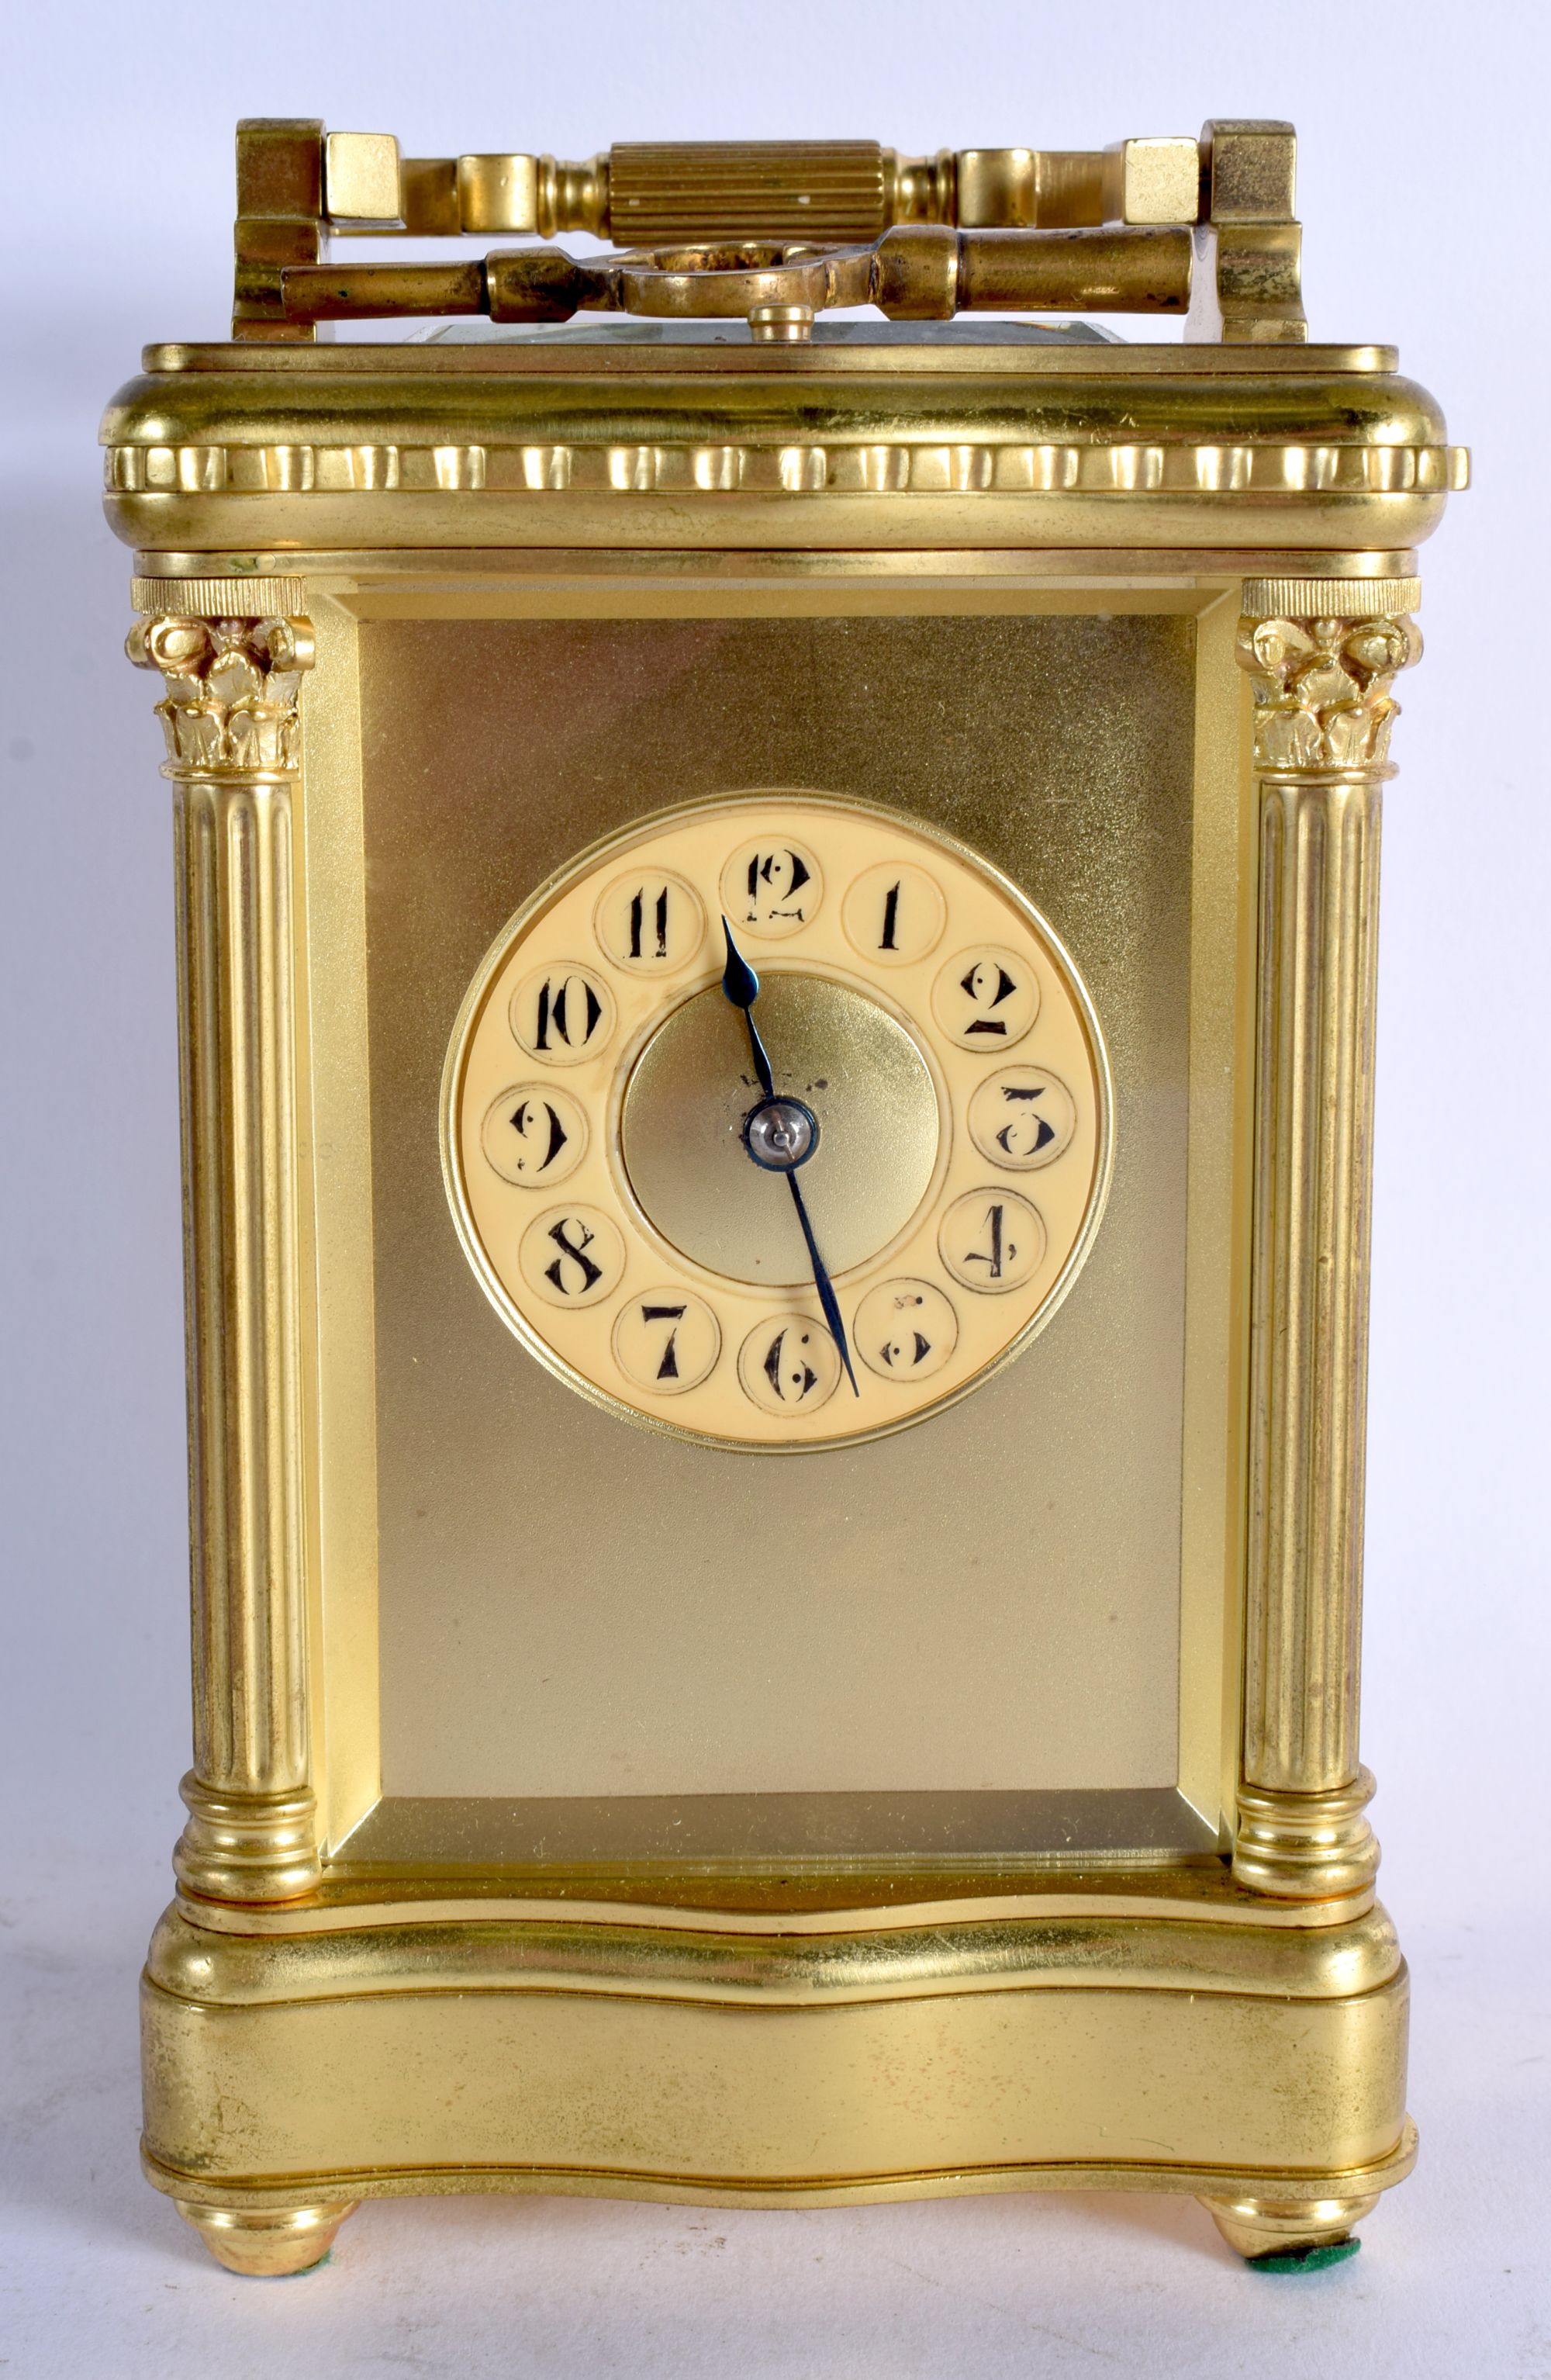 AN EARLY 20TH CENTURY FRENCH BRASS CARRIAGE CLOCK with repeater function. 20.5 cm high inc handle.